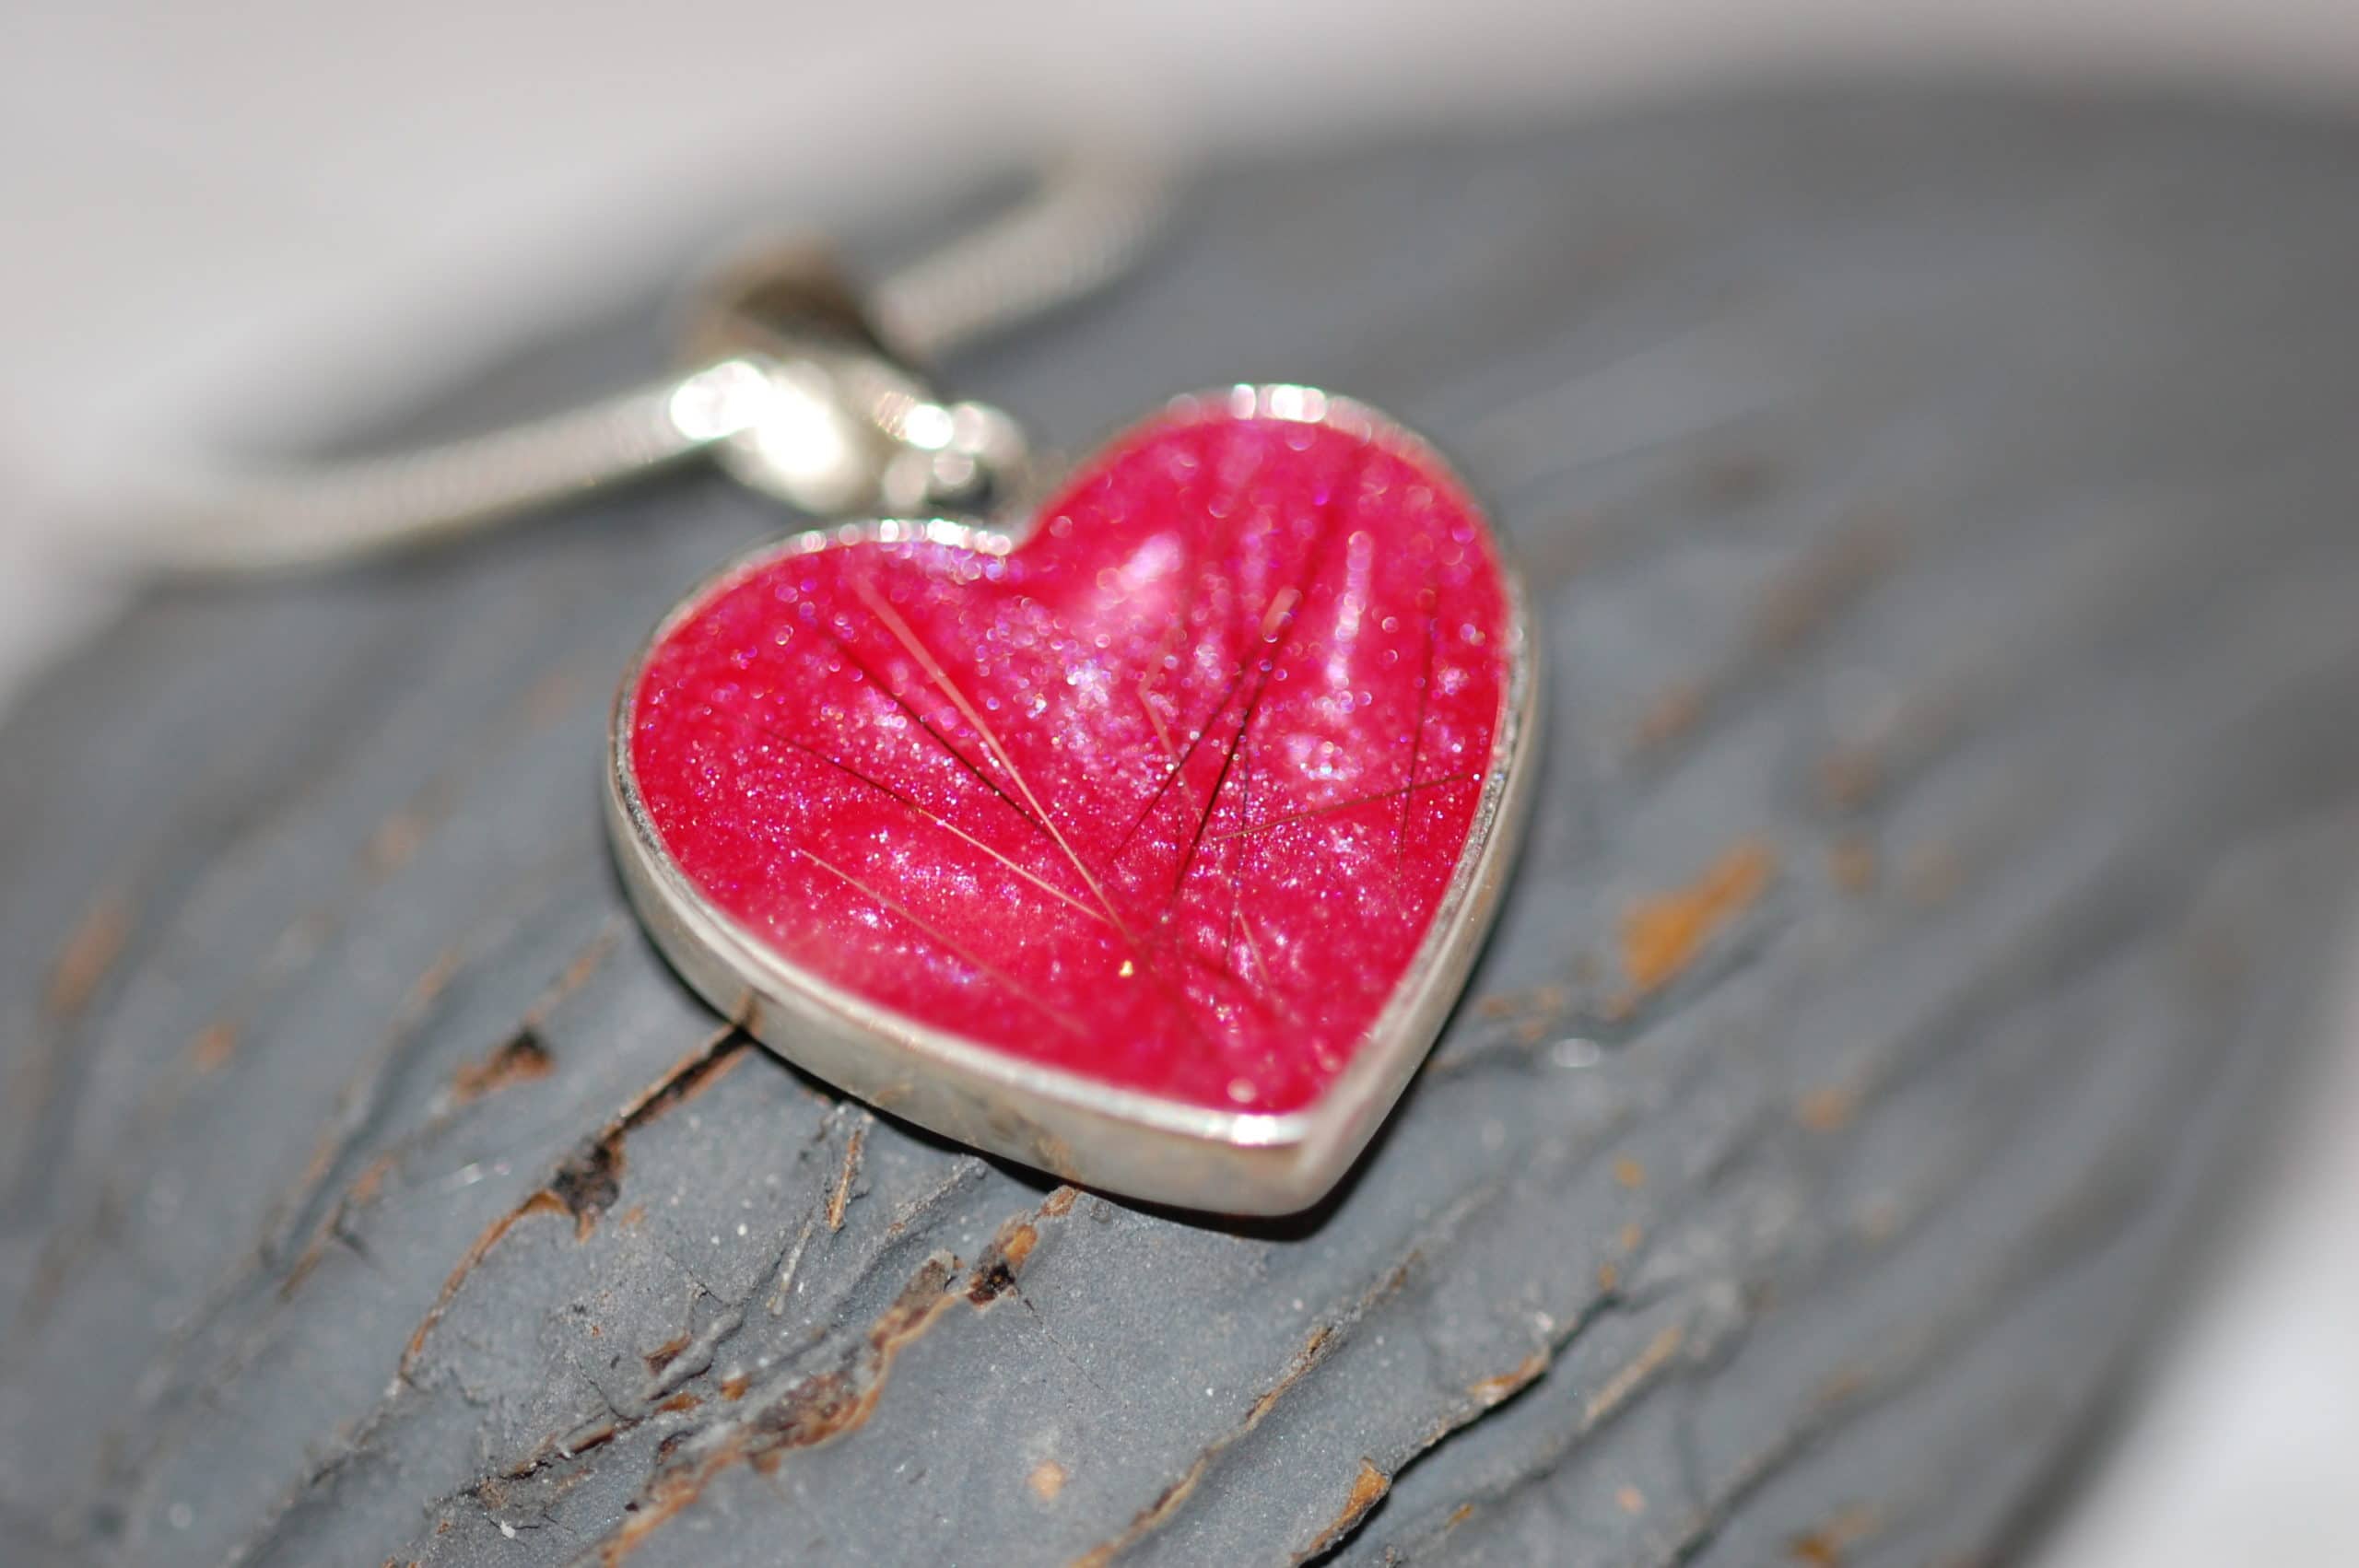 Heart with silver heart pendant with pet fur or cremation ashes pet fur